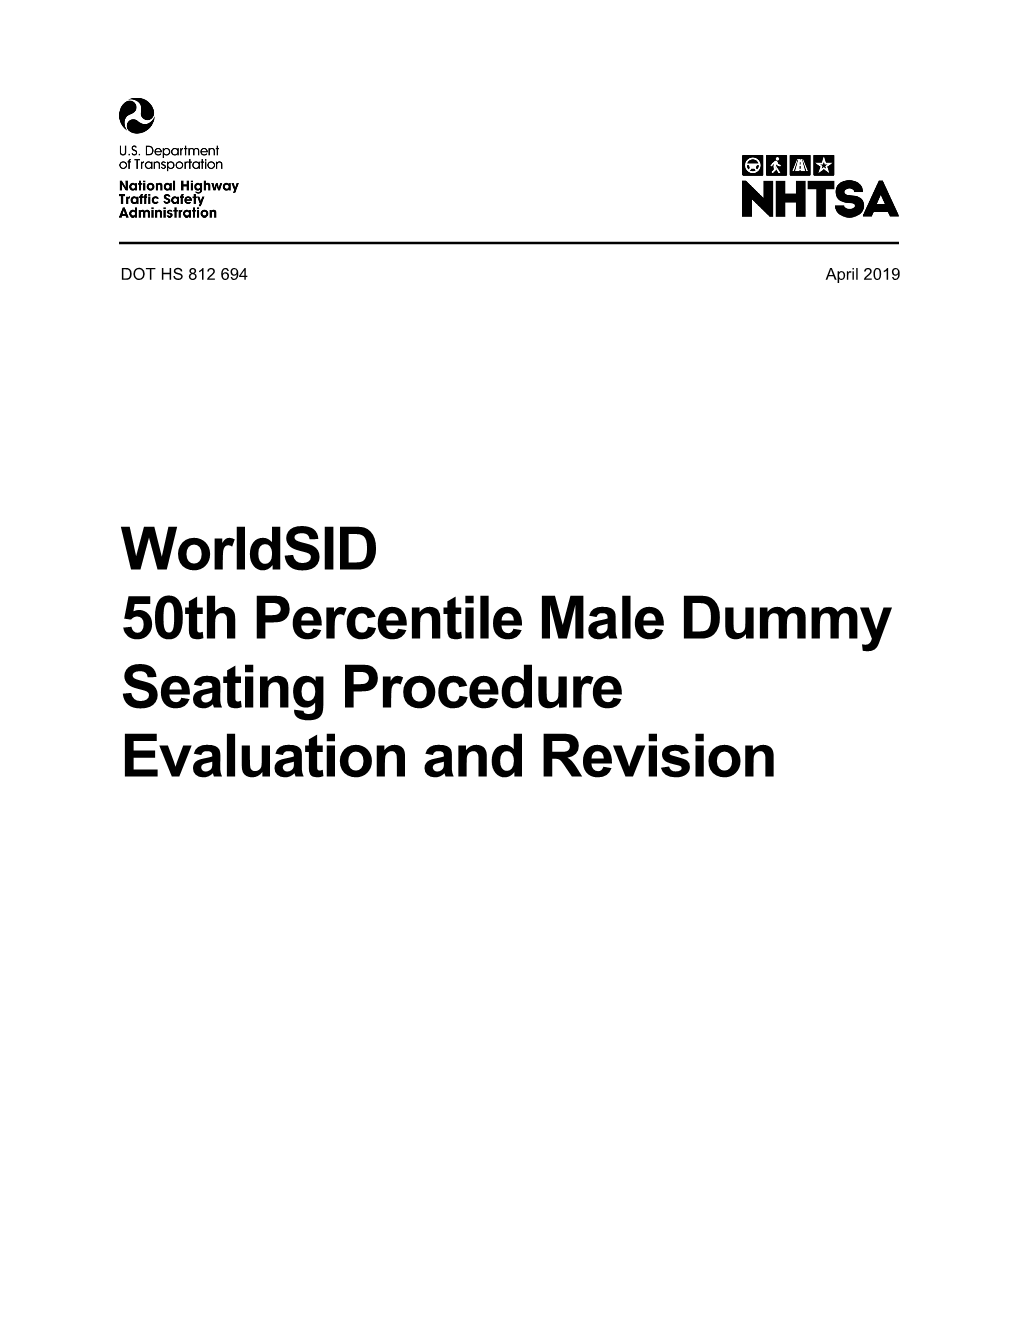 Worldsid 50Th Percentile Male Dummy Seating Procedure Evaluation and Revision